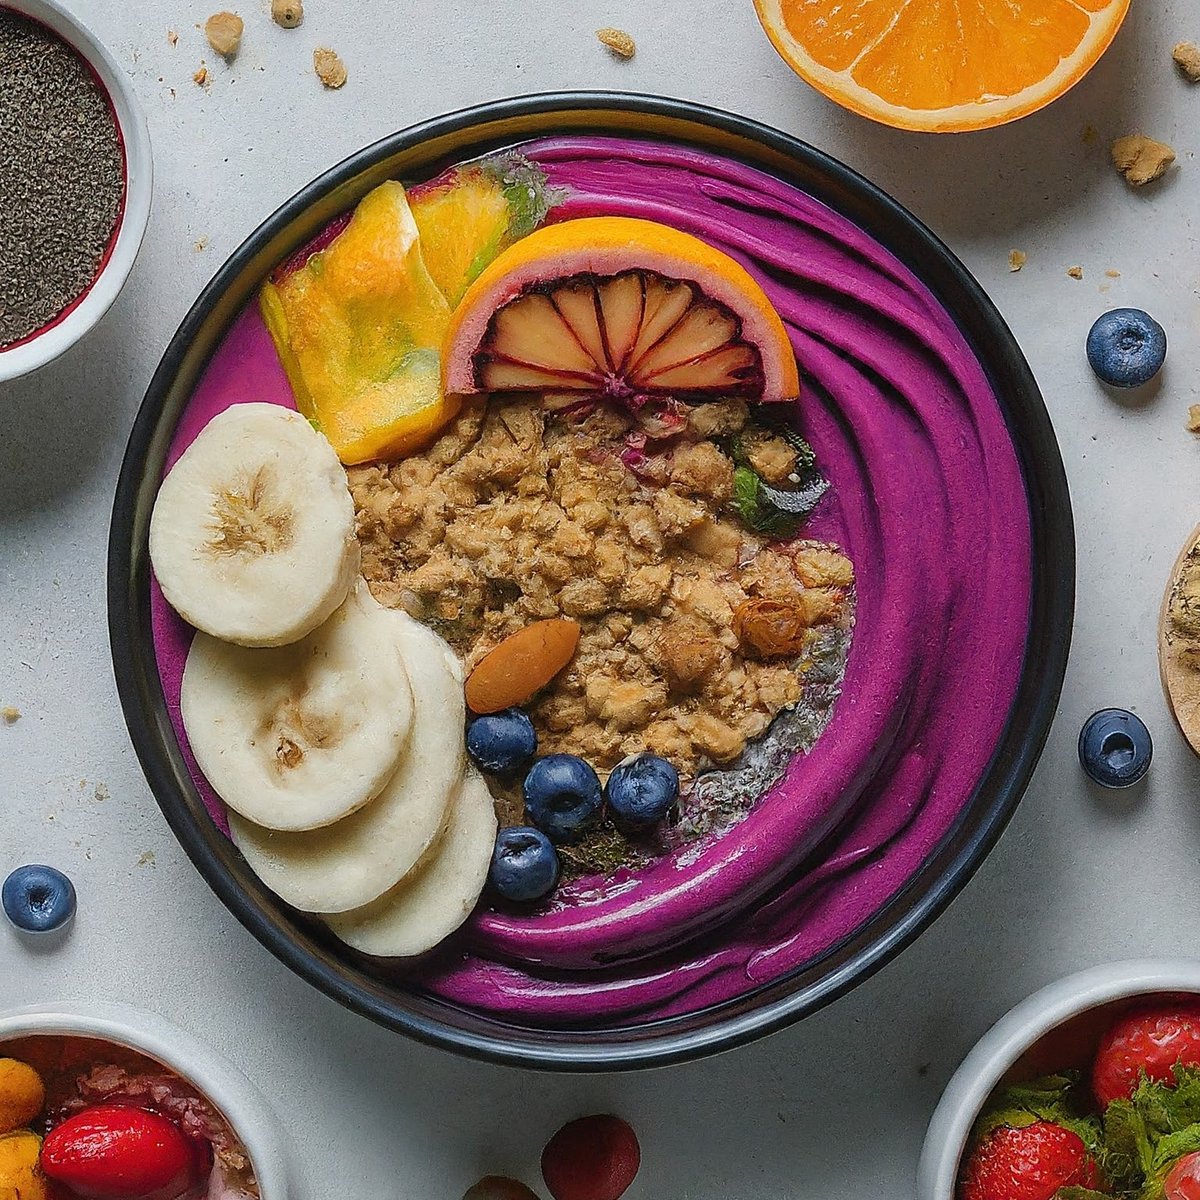 Instant breakfast ideas for busy mornings.  From smoothie bowls to oatmeal & toast toppings, fuel your day the delicious way! buzztimes.news/delicious-and-…

#instantbreakfast #healthyrecipes #quickandeasy #mornings #foodie #healthyeating #busylife #buzztimesnews